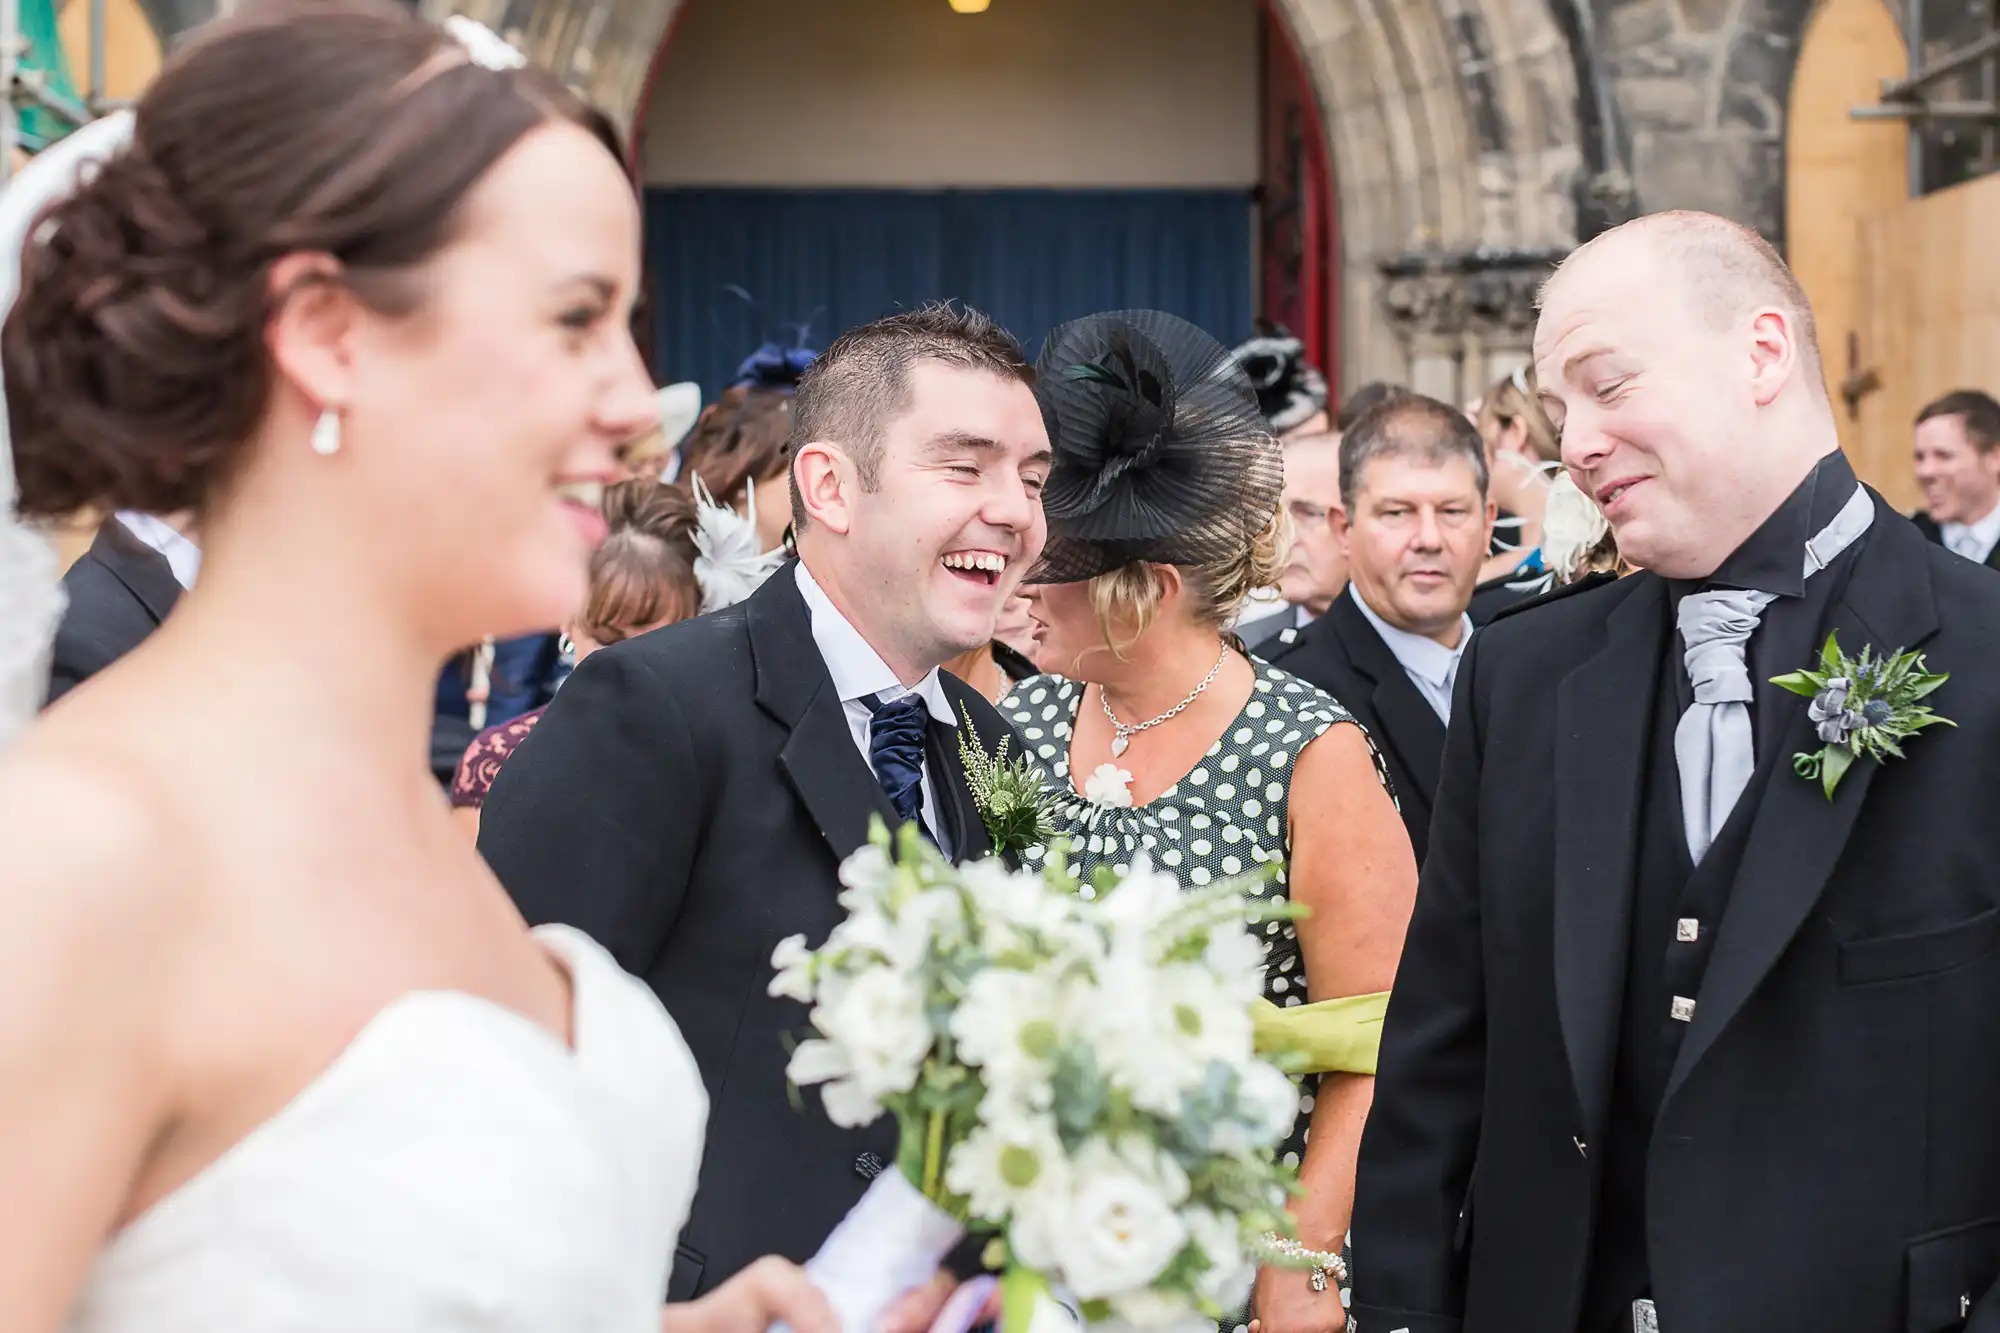 A bride and groom laugh joyously with guests outside a church during their wedding.